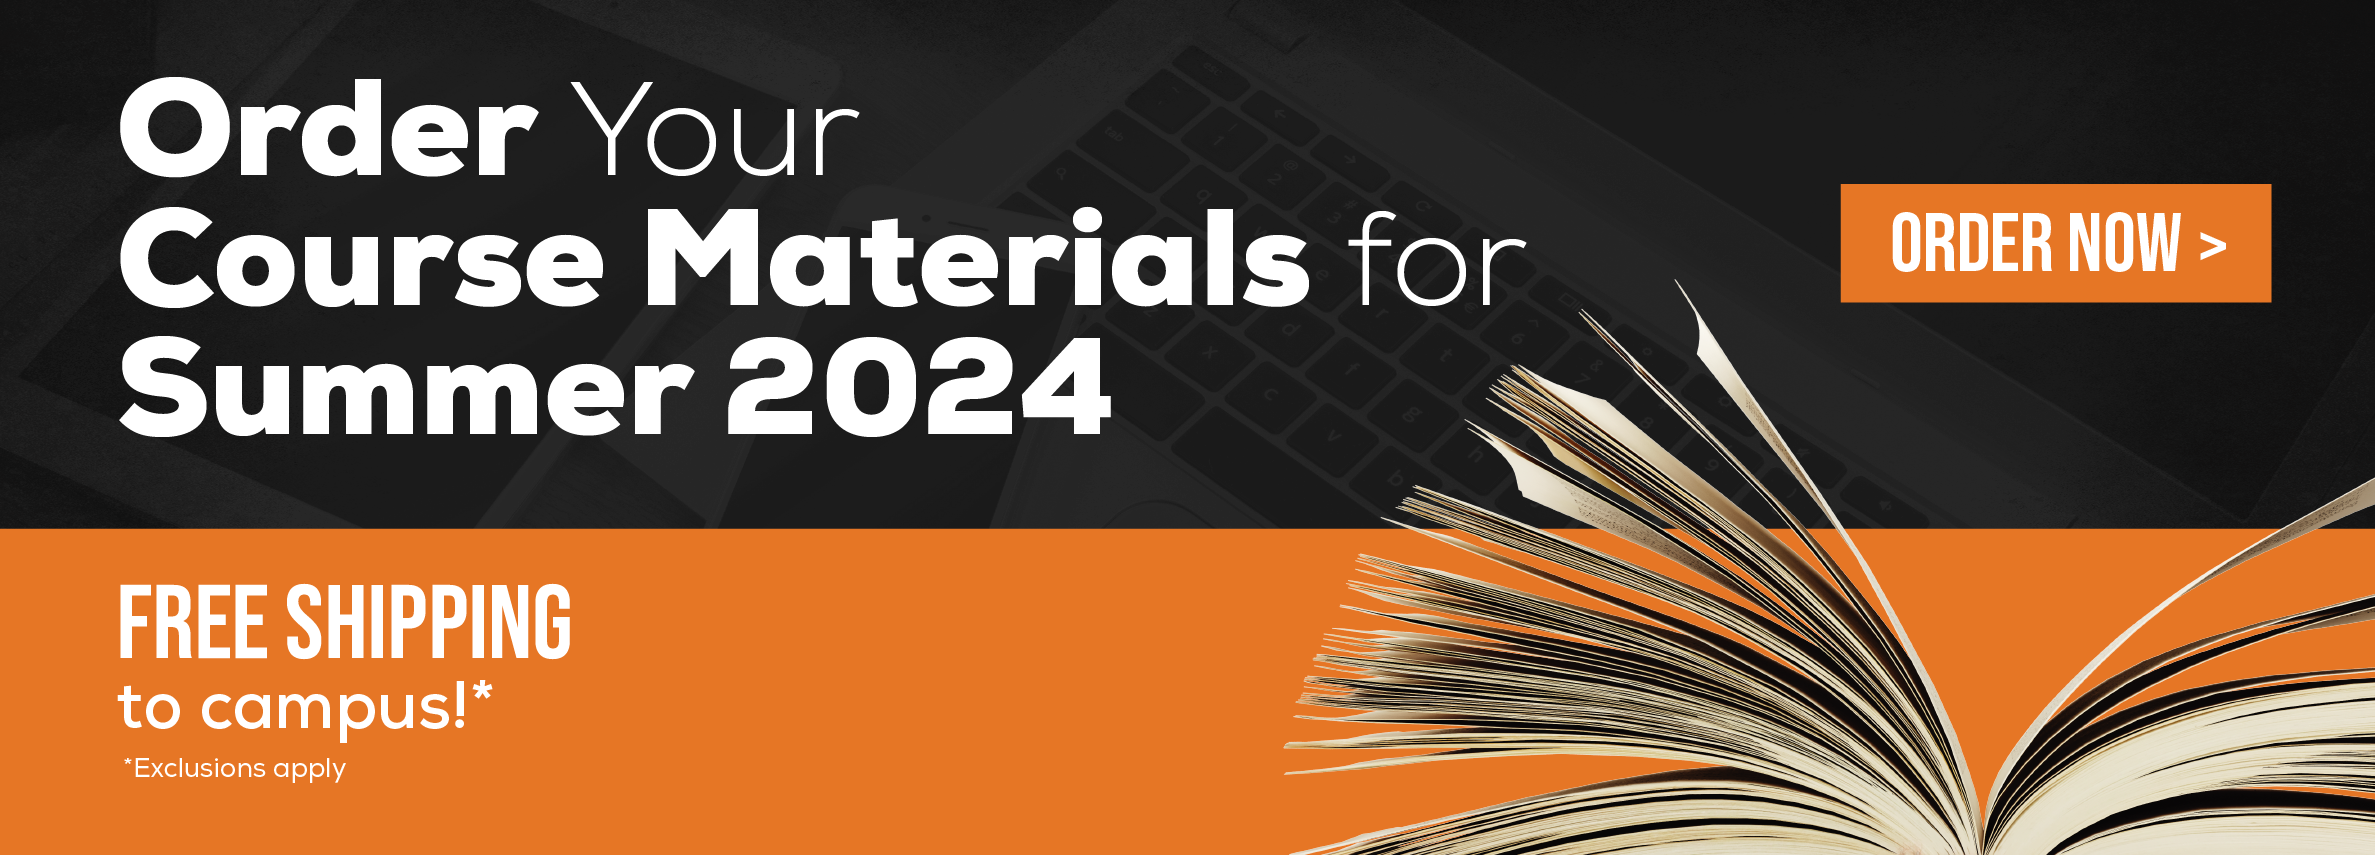 Order Your Course Materials for Summer 2024. Order now. Free shipping to campus!* *Exclusions may apply